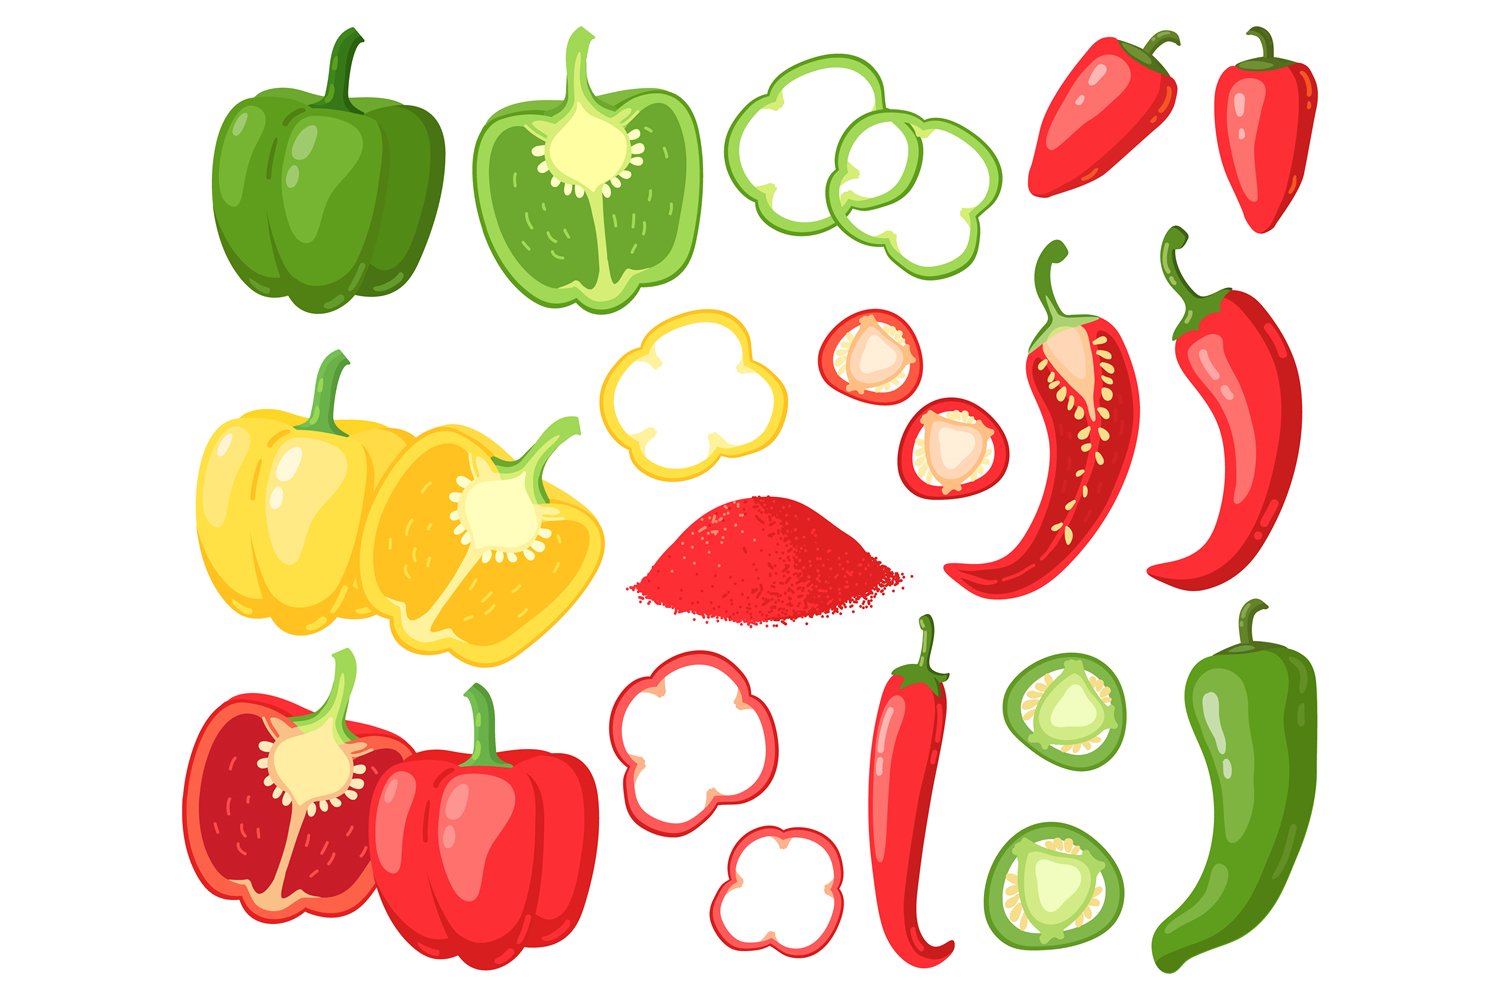 Colorful vegetables and peppers collection.